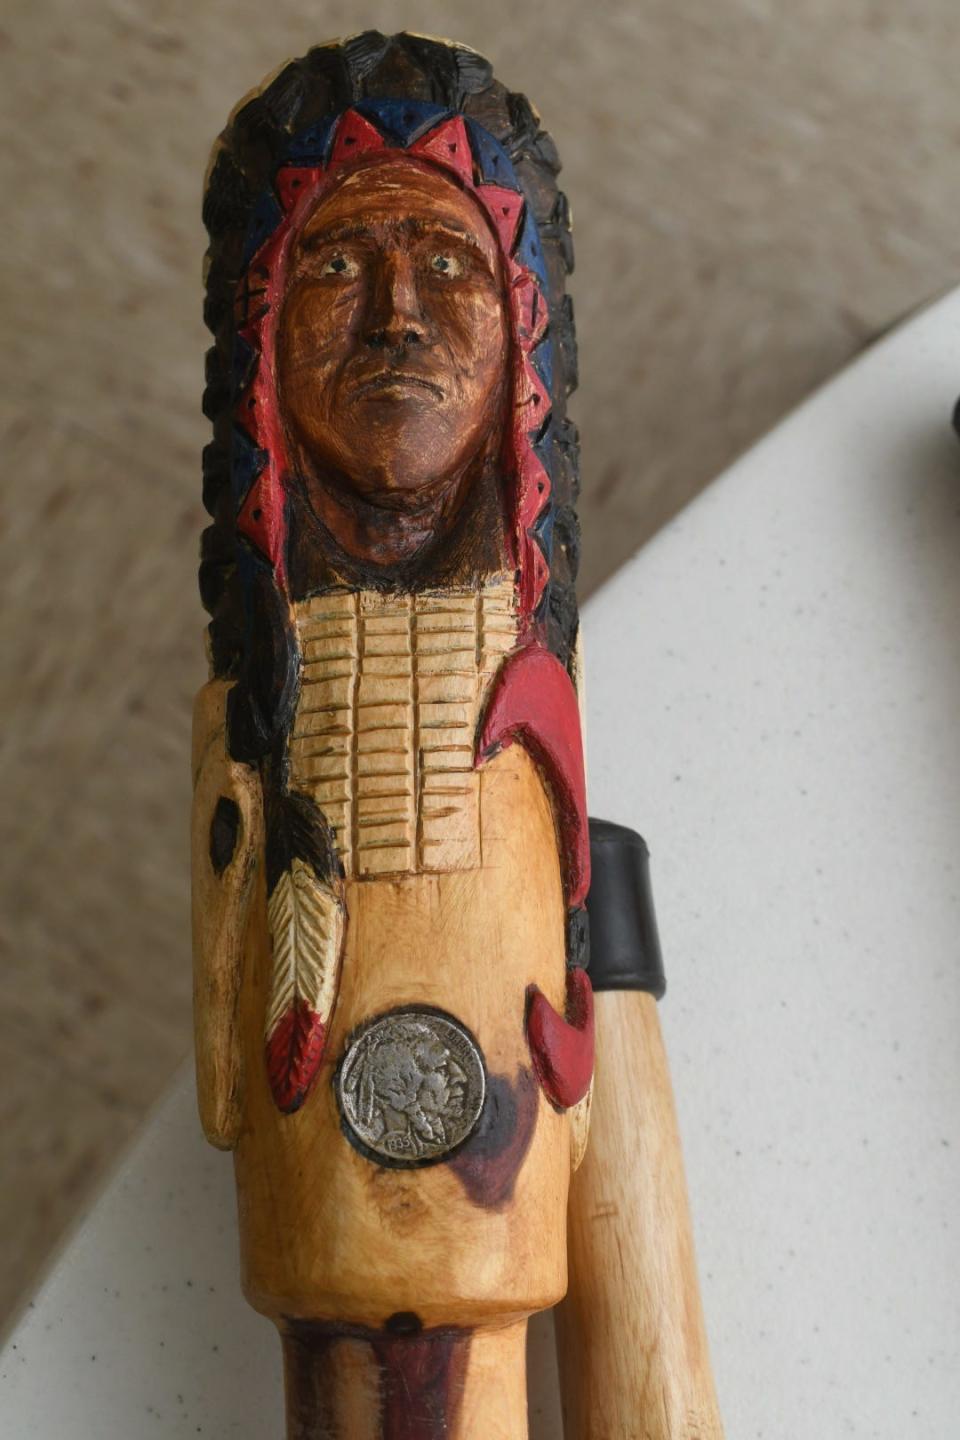 Earl Dugger carved the head of a Native American tribal chief on one of his walking sticks. Each stick and walking cane he makes is adorned with a real Buffalo nickel in the handle.